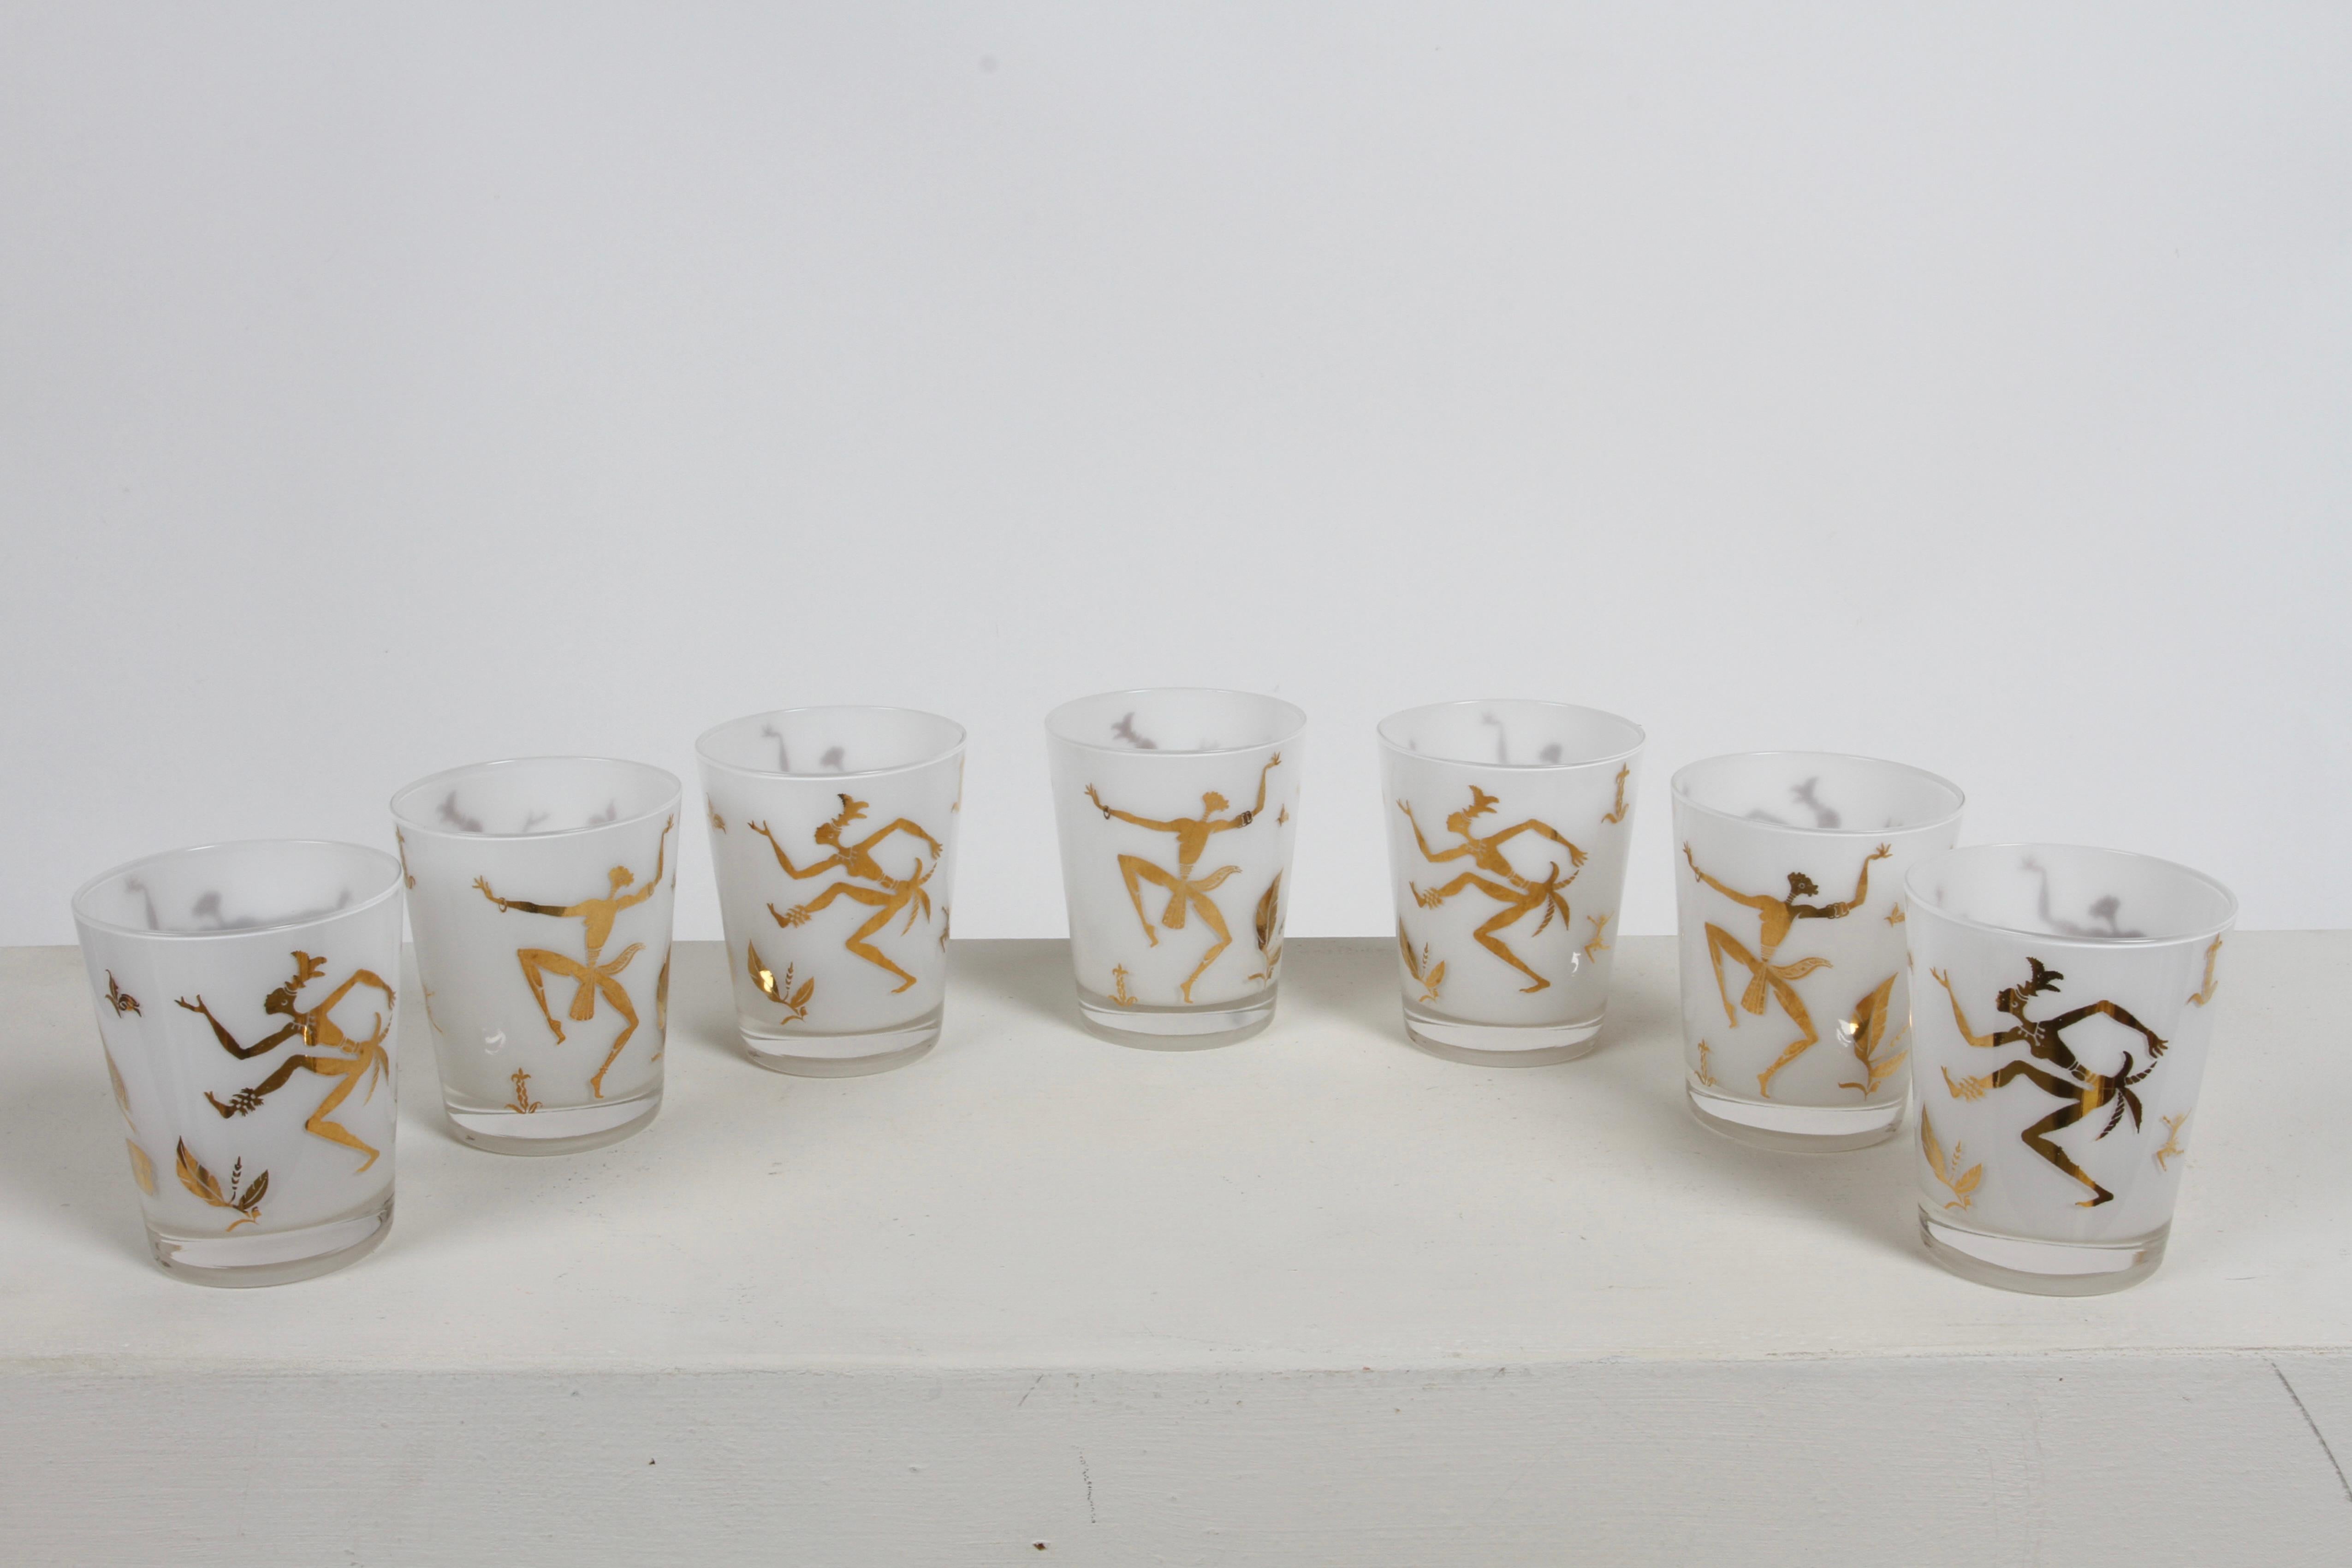 Vintage set of 7 Josephine Baker Jazz Age 22-karat gold exotic nude African Tribal dancers on white rocks glasses by Federal Glass Co. This set seems to be have used very little. These can only be washed by hand in cool water. DO NOT USE HOT OR WARM